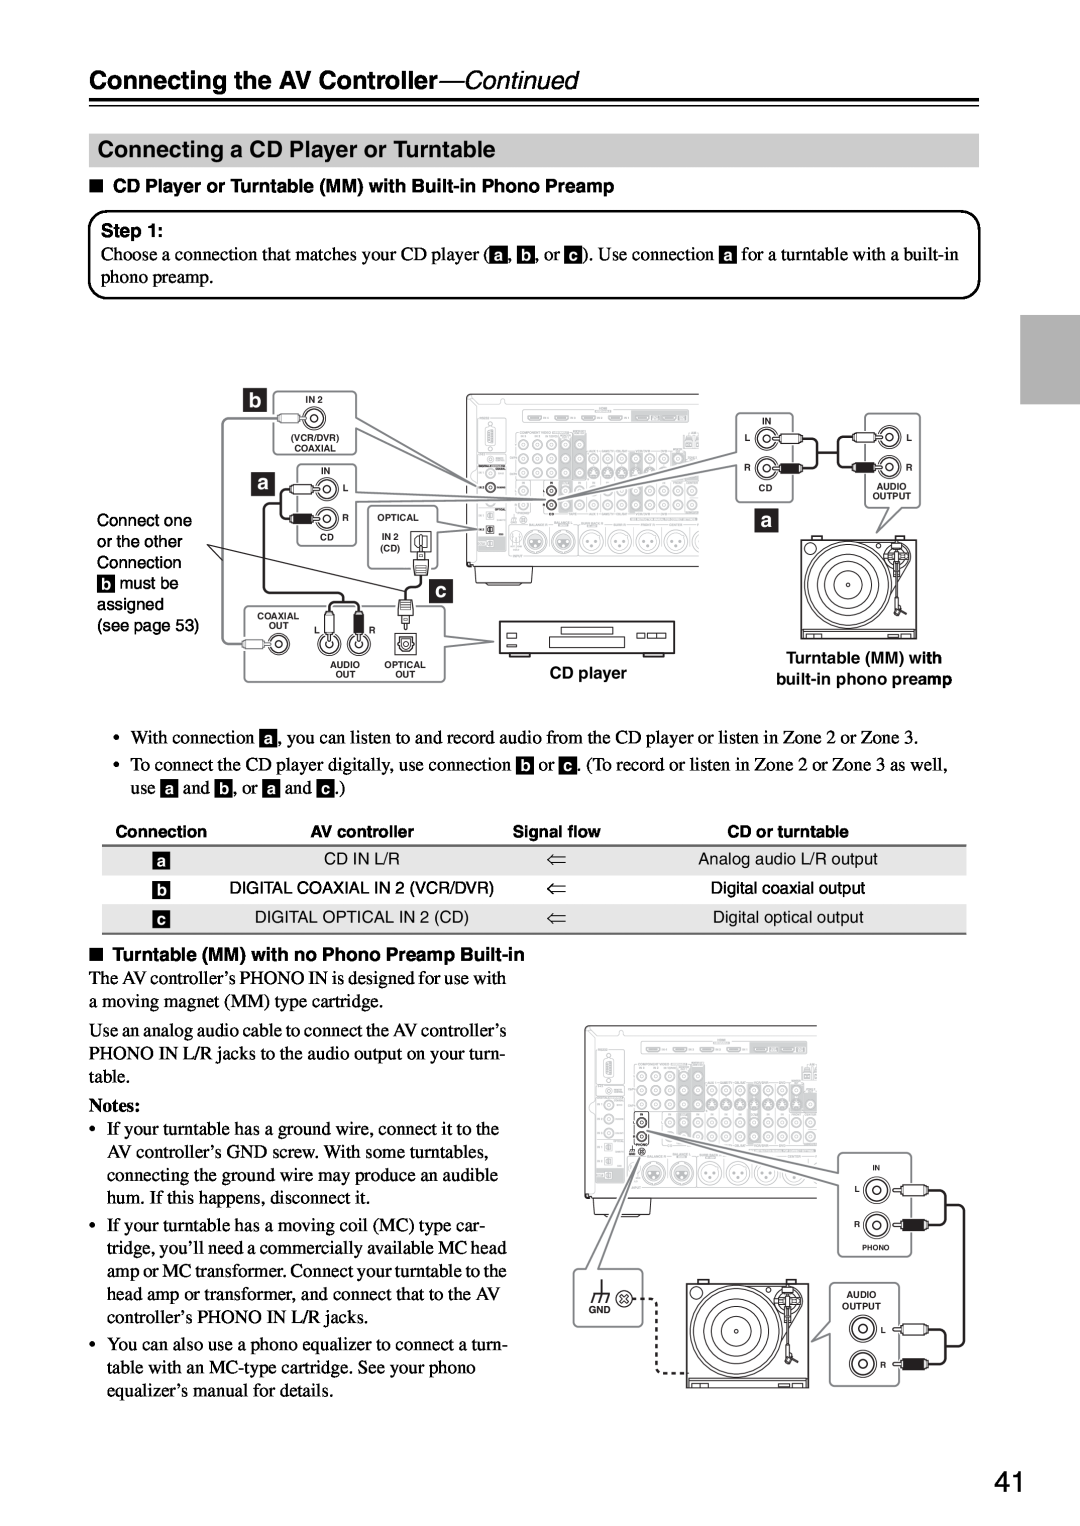 Onkyo PR-SC886 instruction manual Connecting a CD Player or Turntable, Connecting the AV Controller—Continued, Notes 